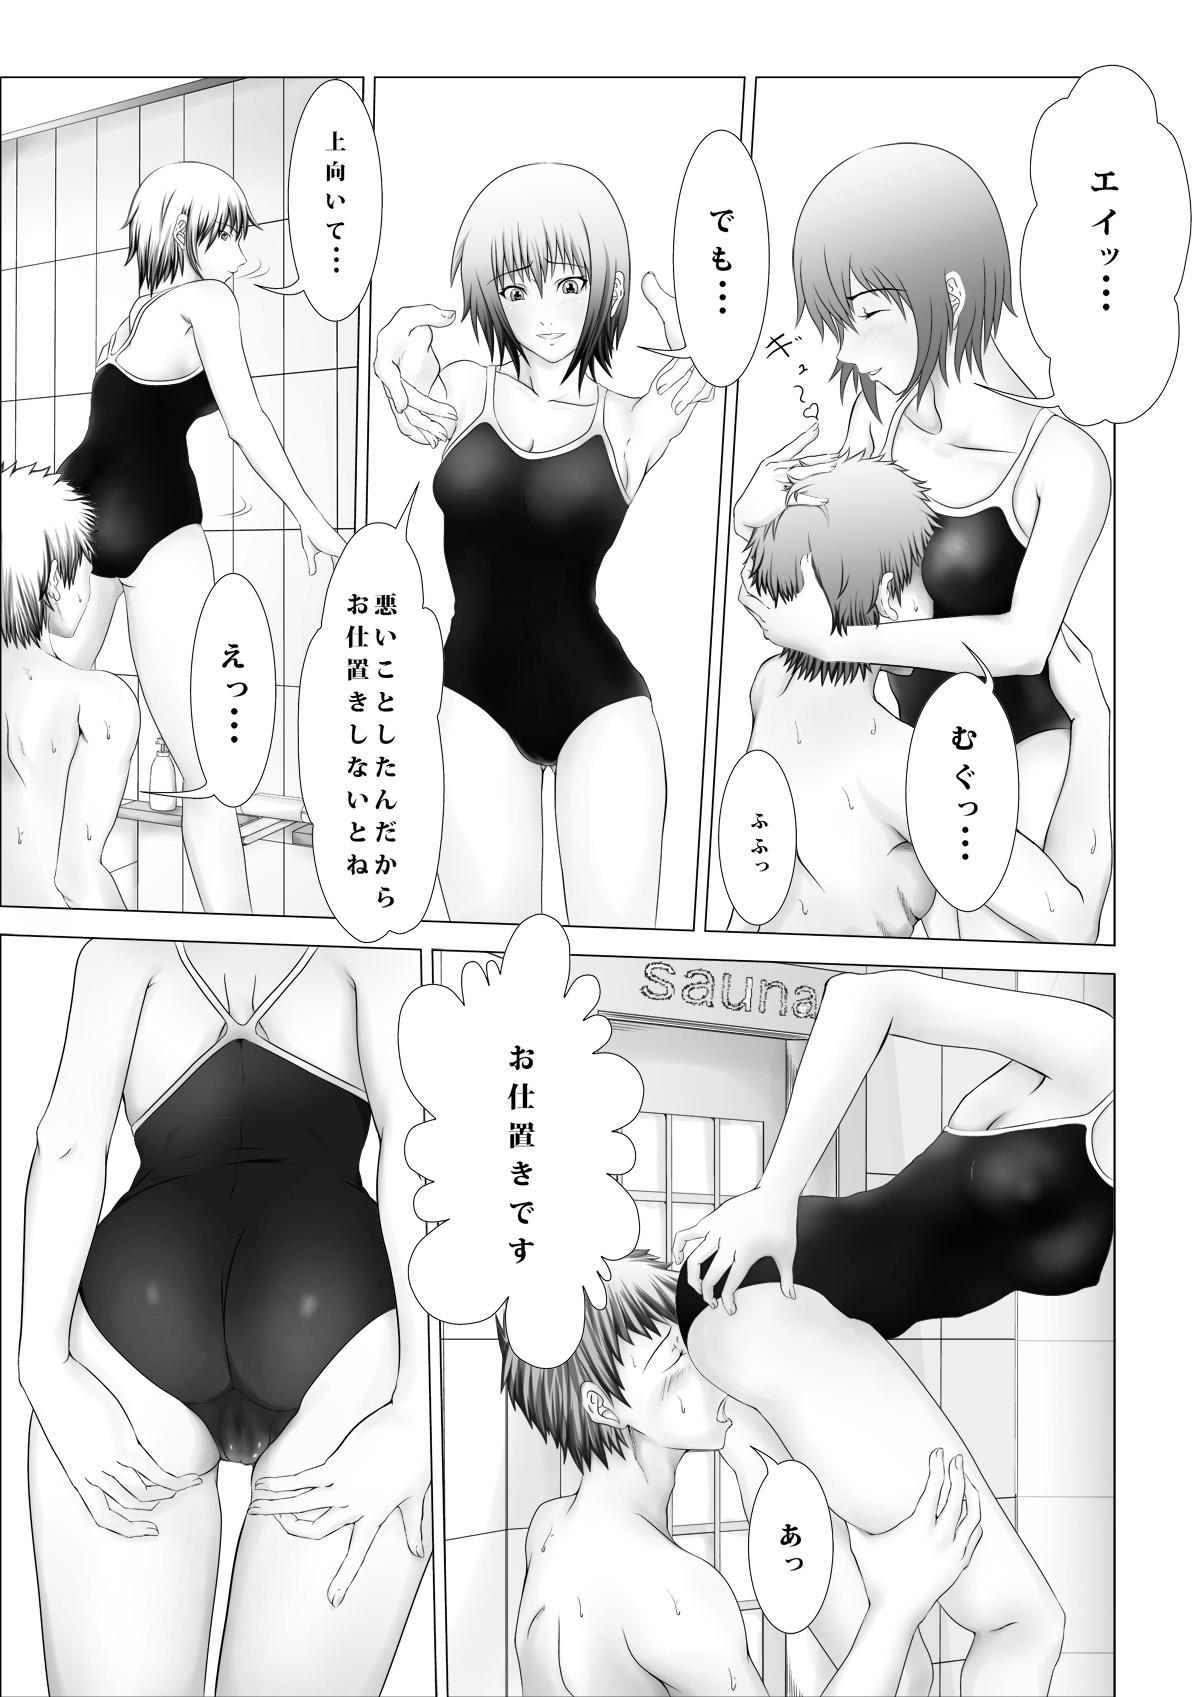 Outdoor 急所責めマニアックスvol.3 Furry - Page 8